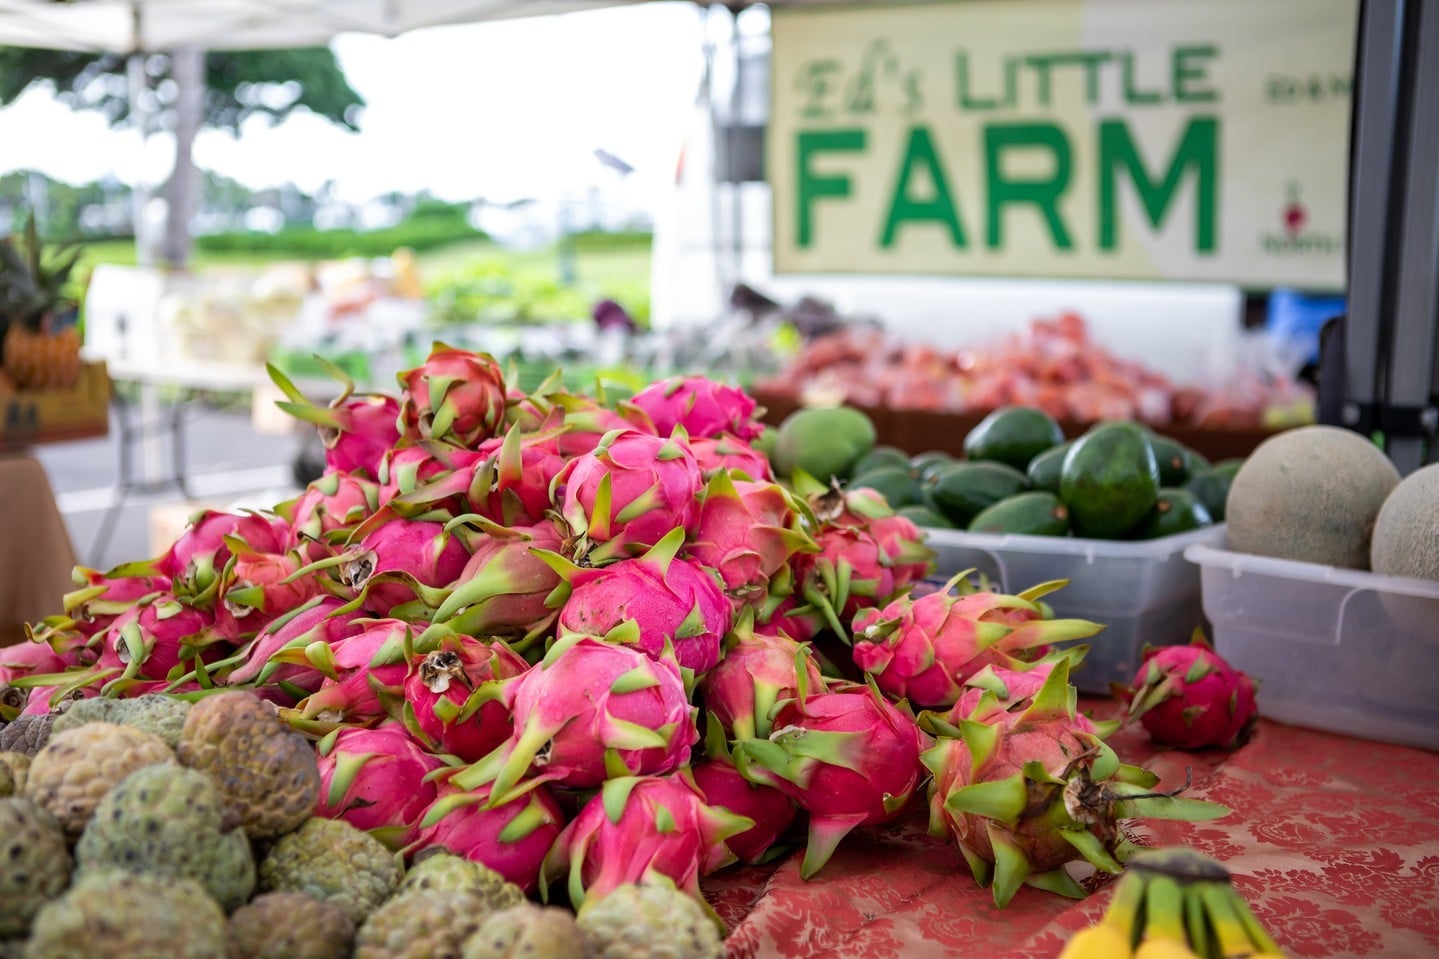 Stay on track with your New Year’s resolutions at the Kakaʻako Farmers Market! Find healthy, fresh local produce, artisan snacks and grab-and-go eats every Saturday from 8am - 12pm. Learn more in our link in bio.